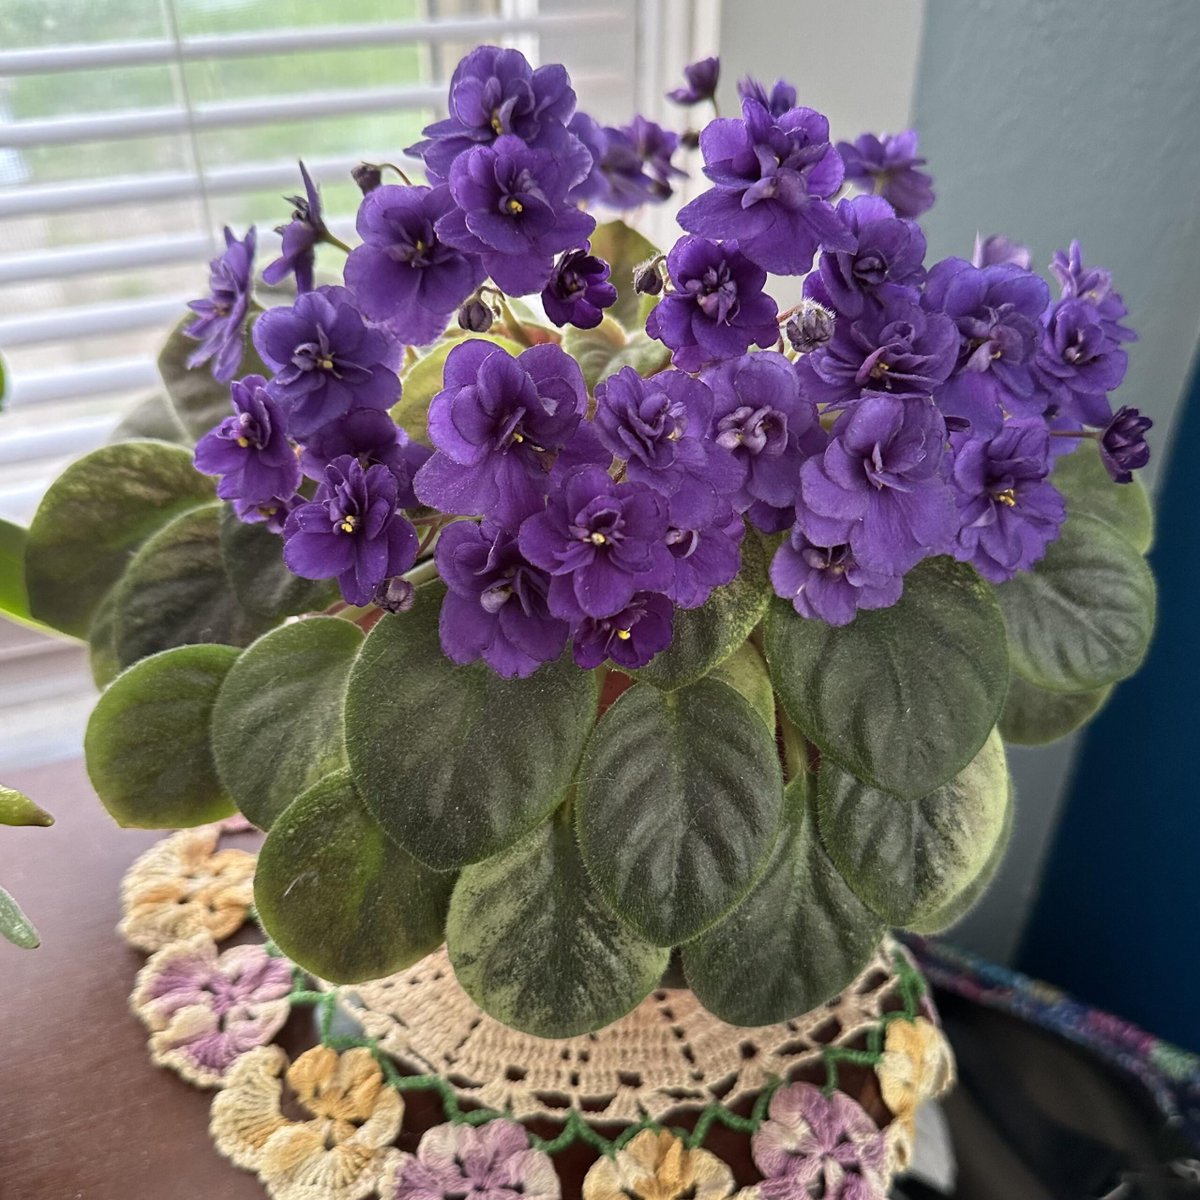 The most blooms yet! allforgardening.com/850025/the-mos… #AfricanViolets